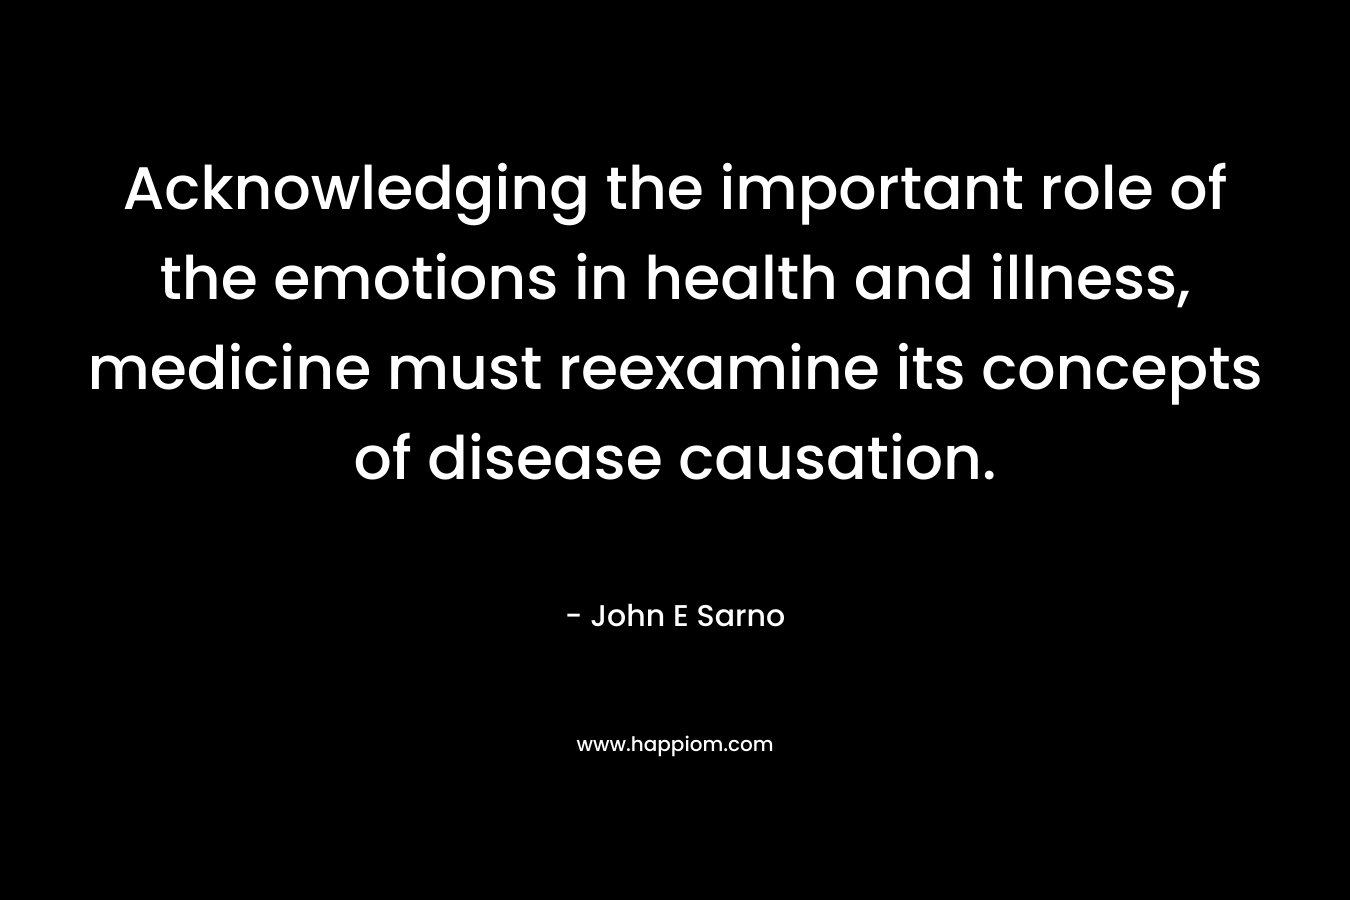 Acknowledging the important role of the emotions in health and illness, medicine must reexamine its concepts of disease causation.